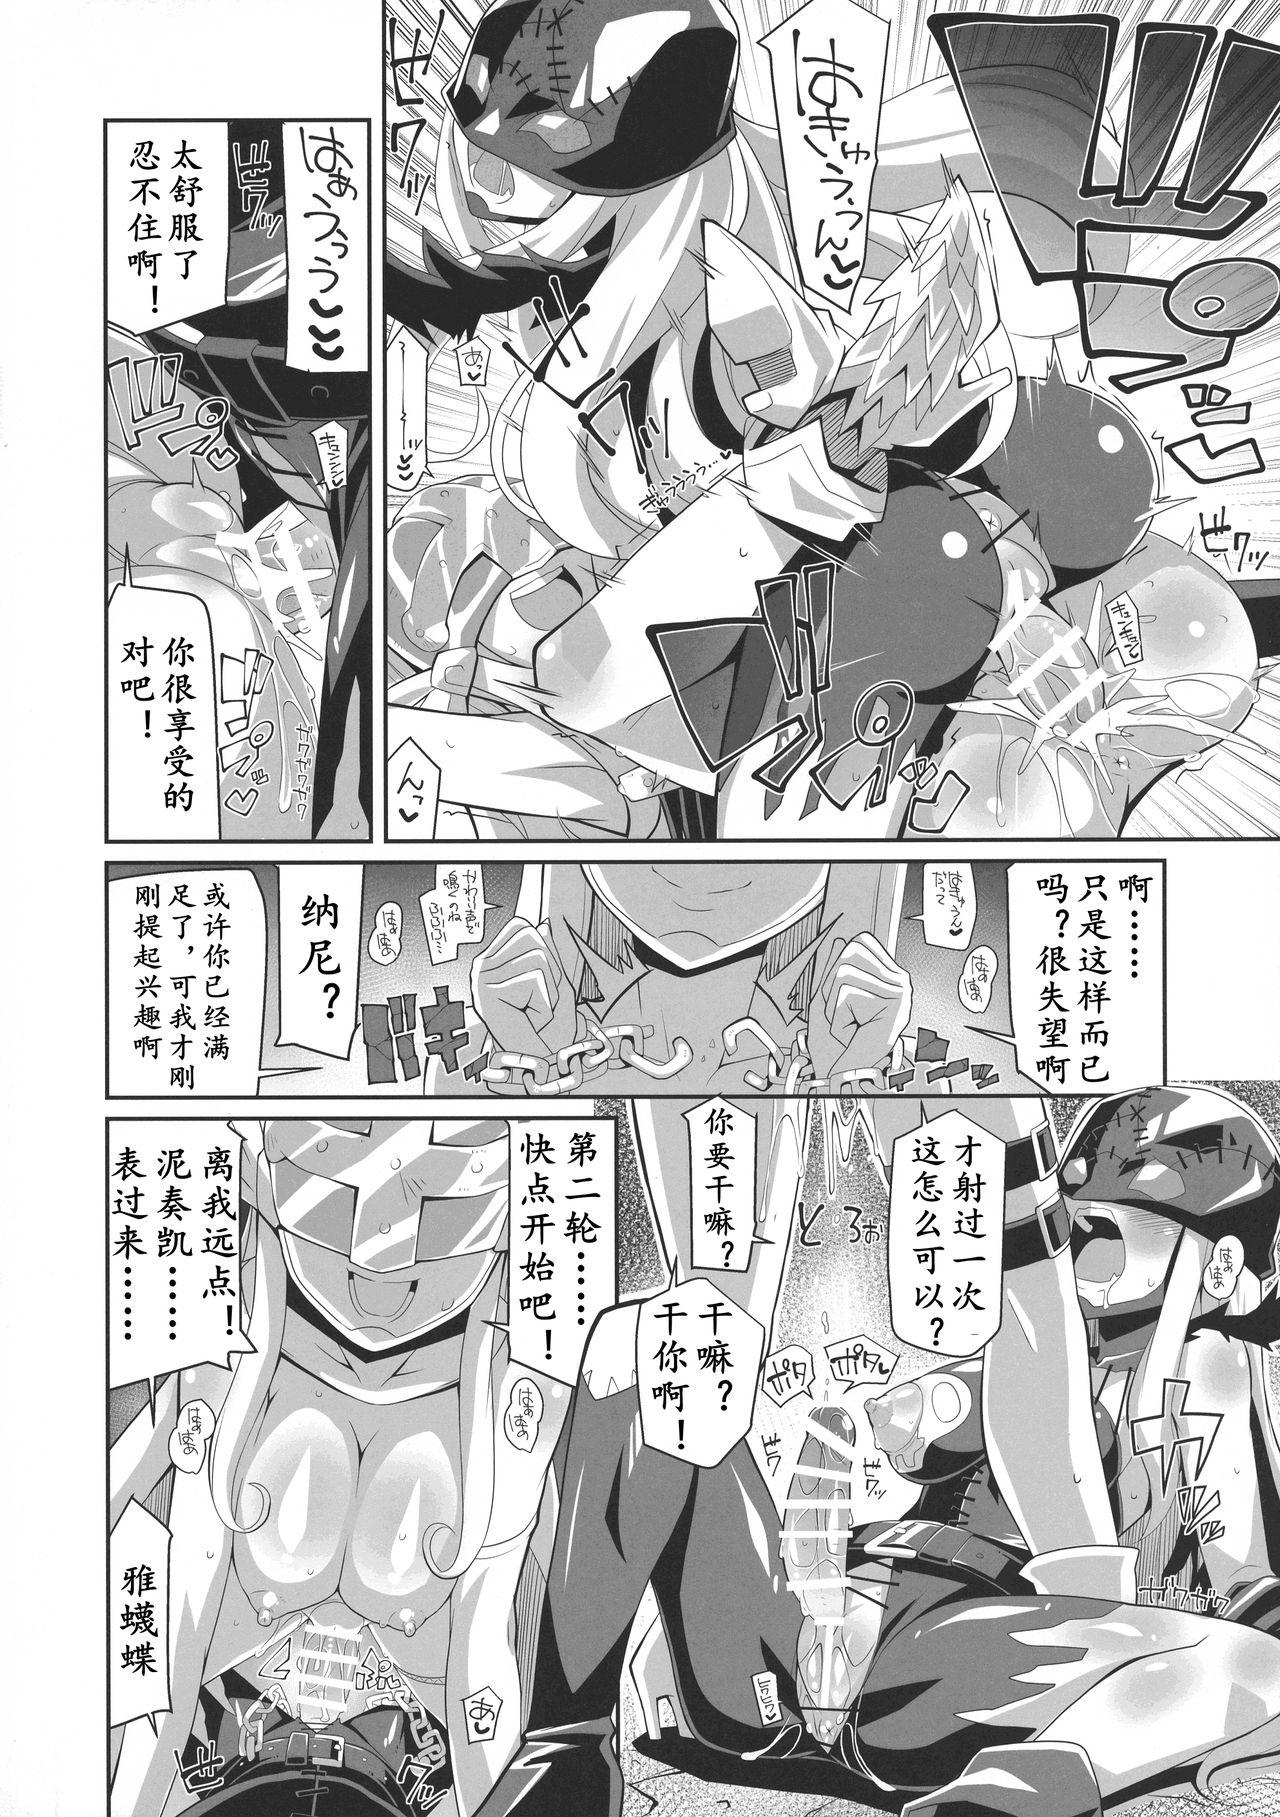 She ANGELSxDEMONS | 莫斯提兽 - Digimon Gay Youngmen - Page 7